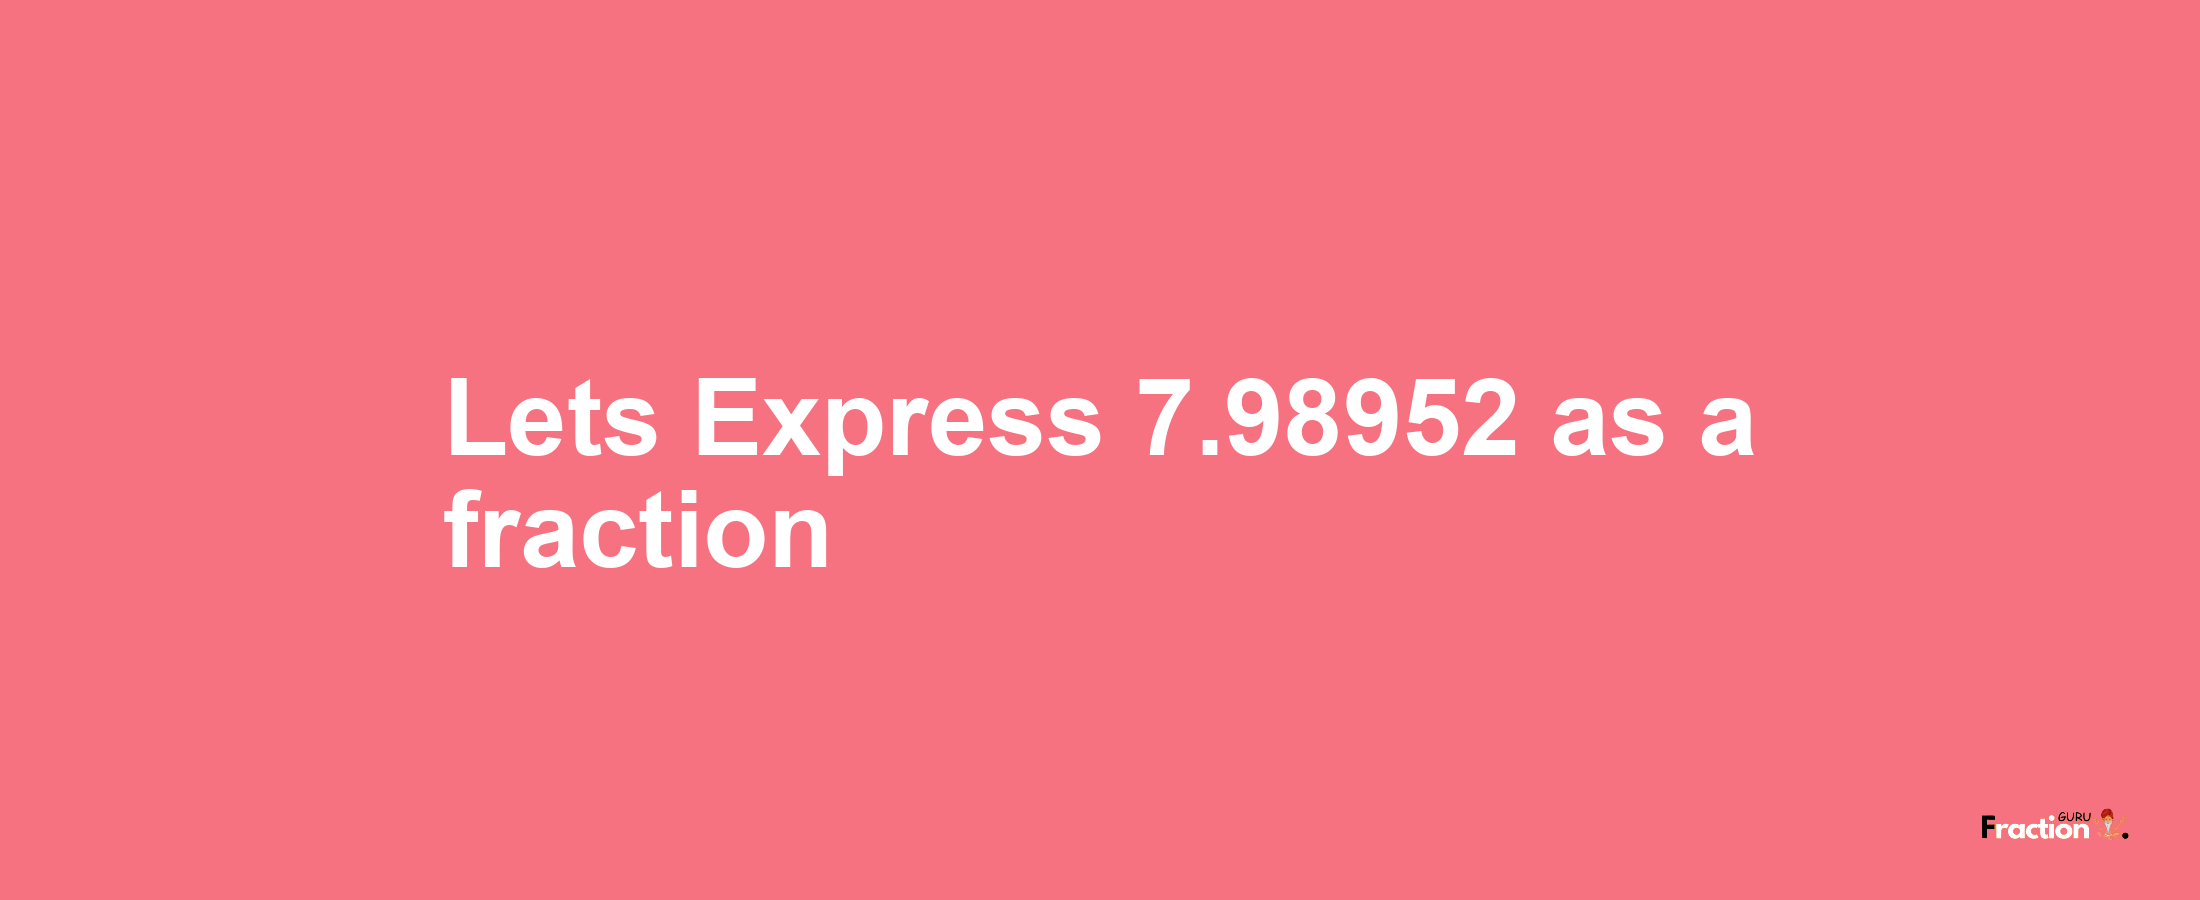 Lets Express 7.98952 as afraction